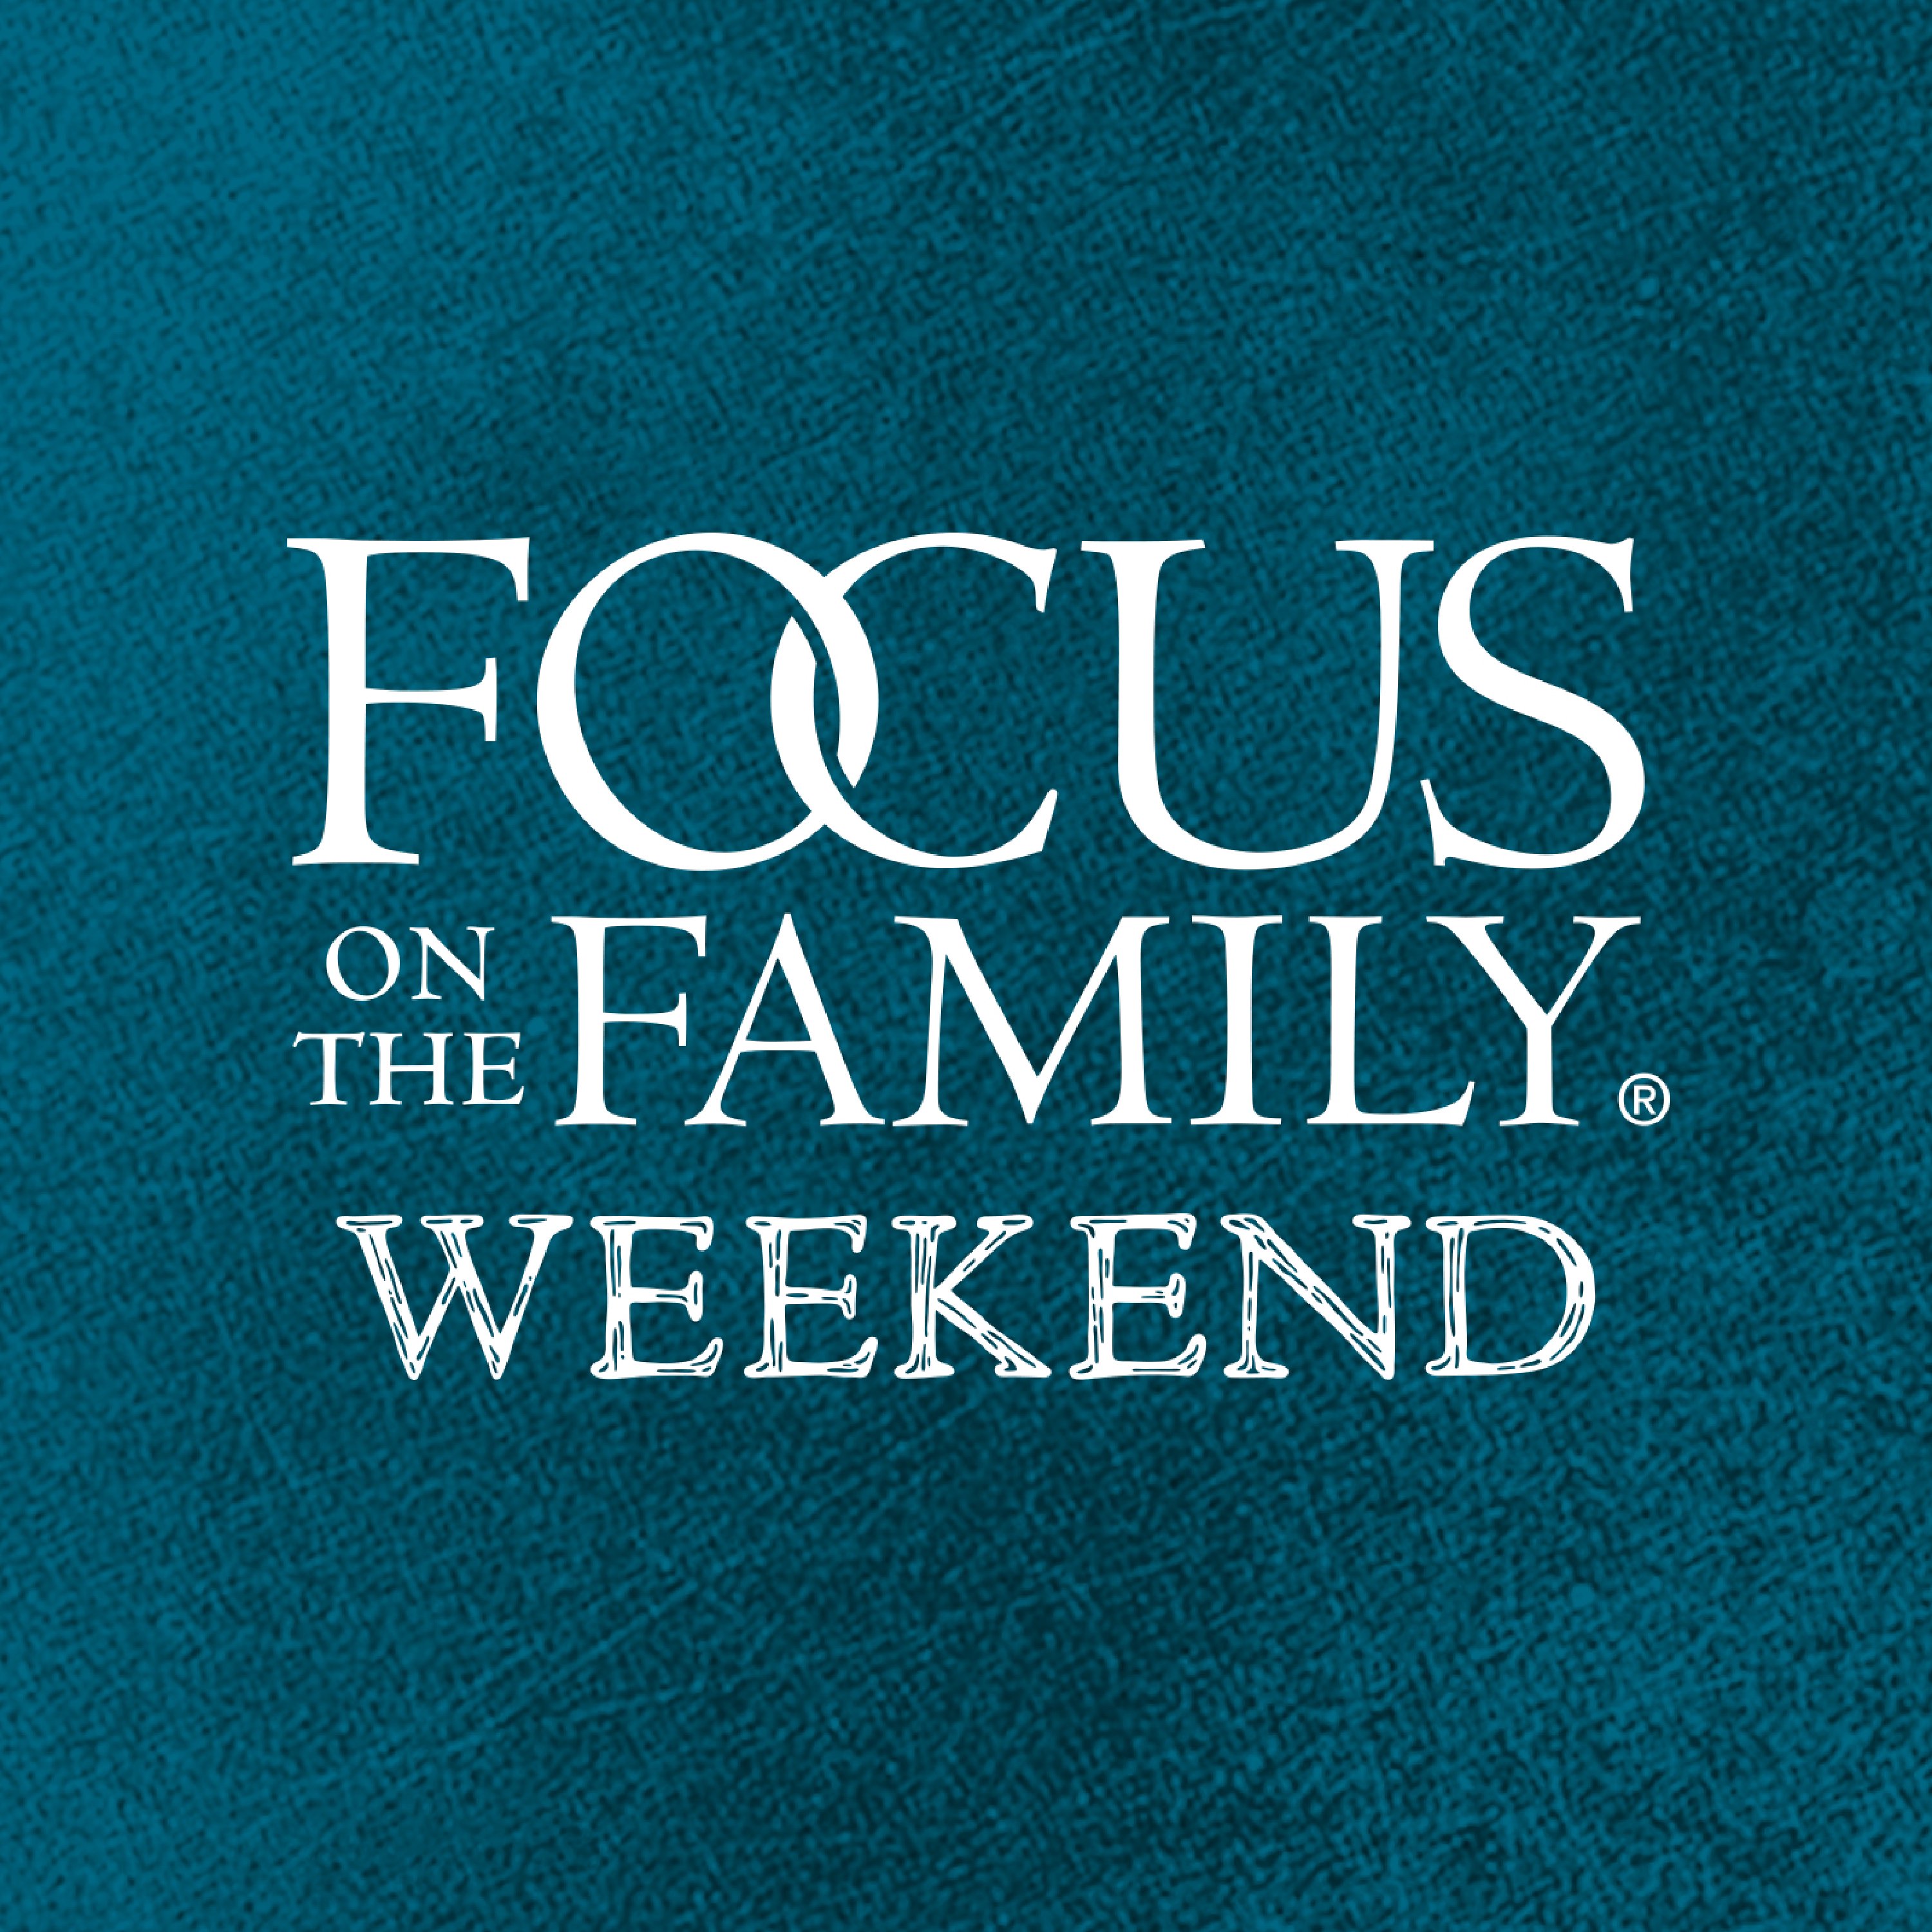 Focus on the Family Weekend: Dec. 2-3 2023